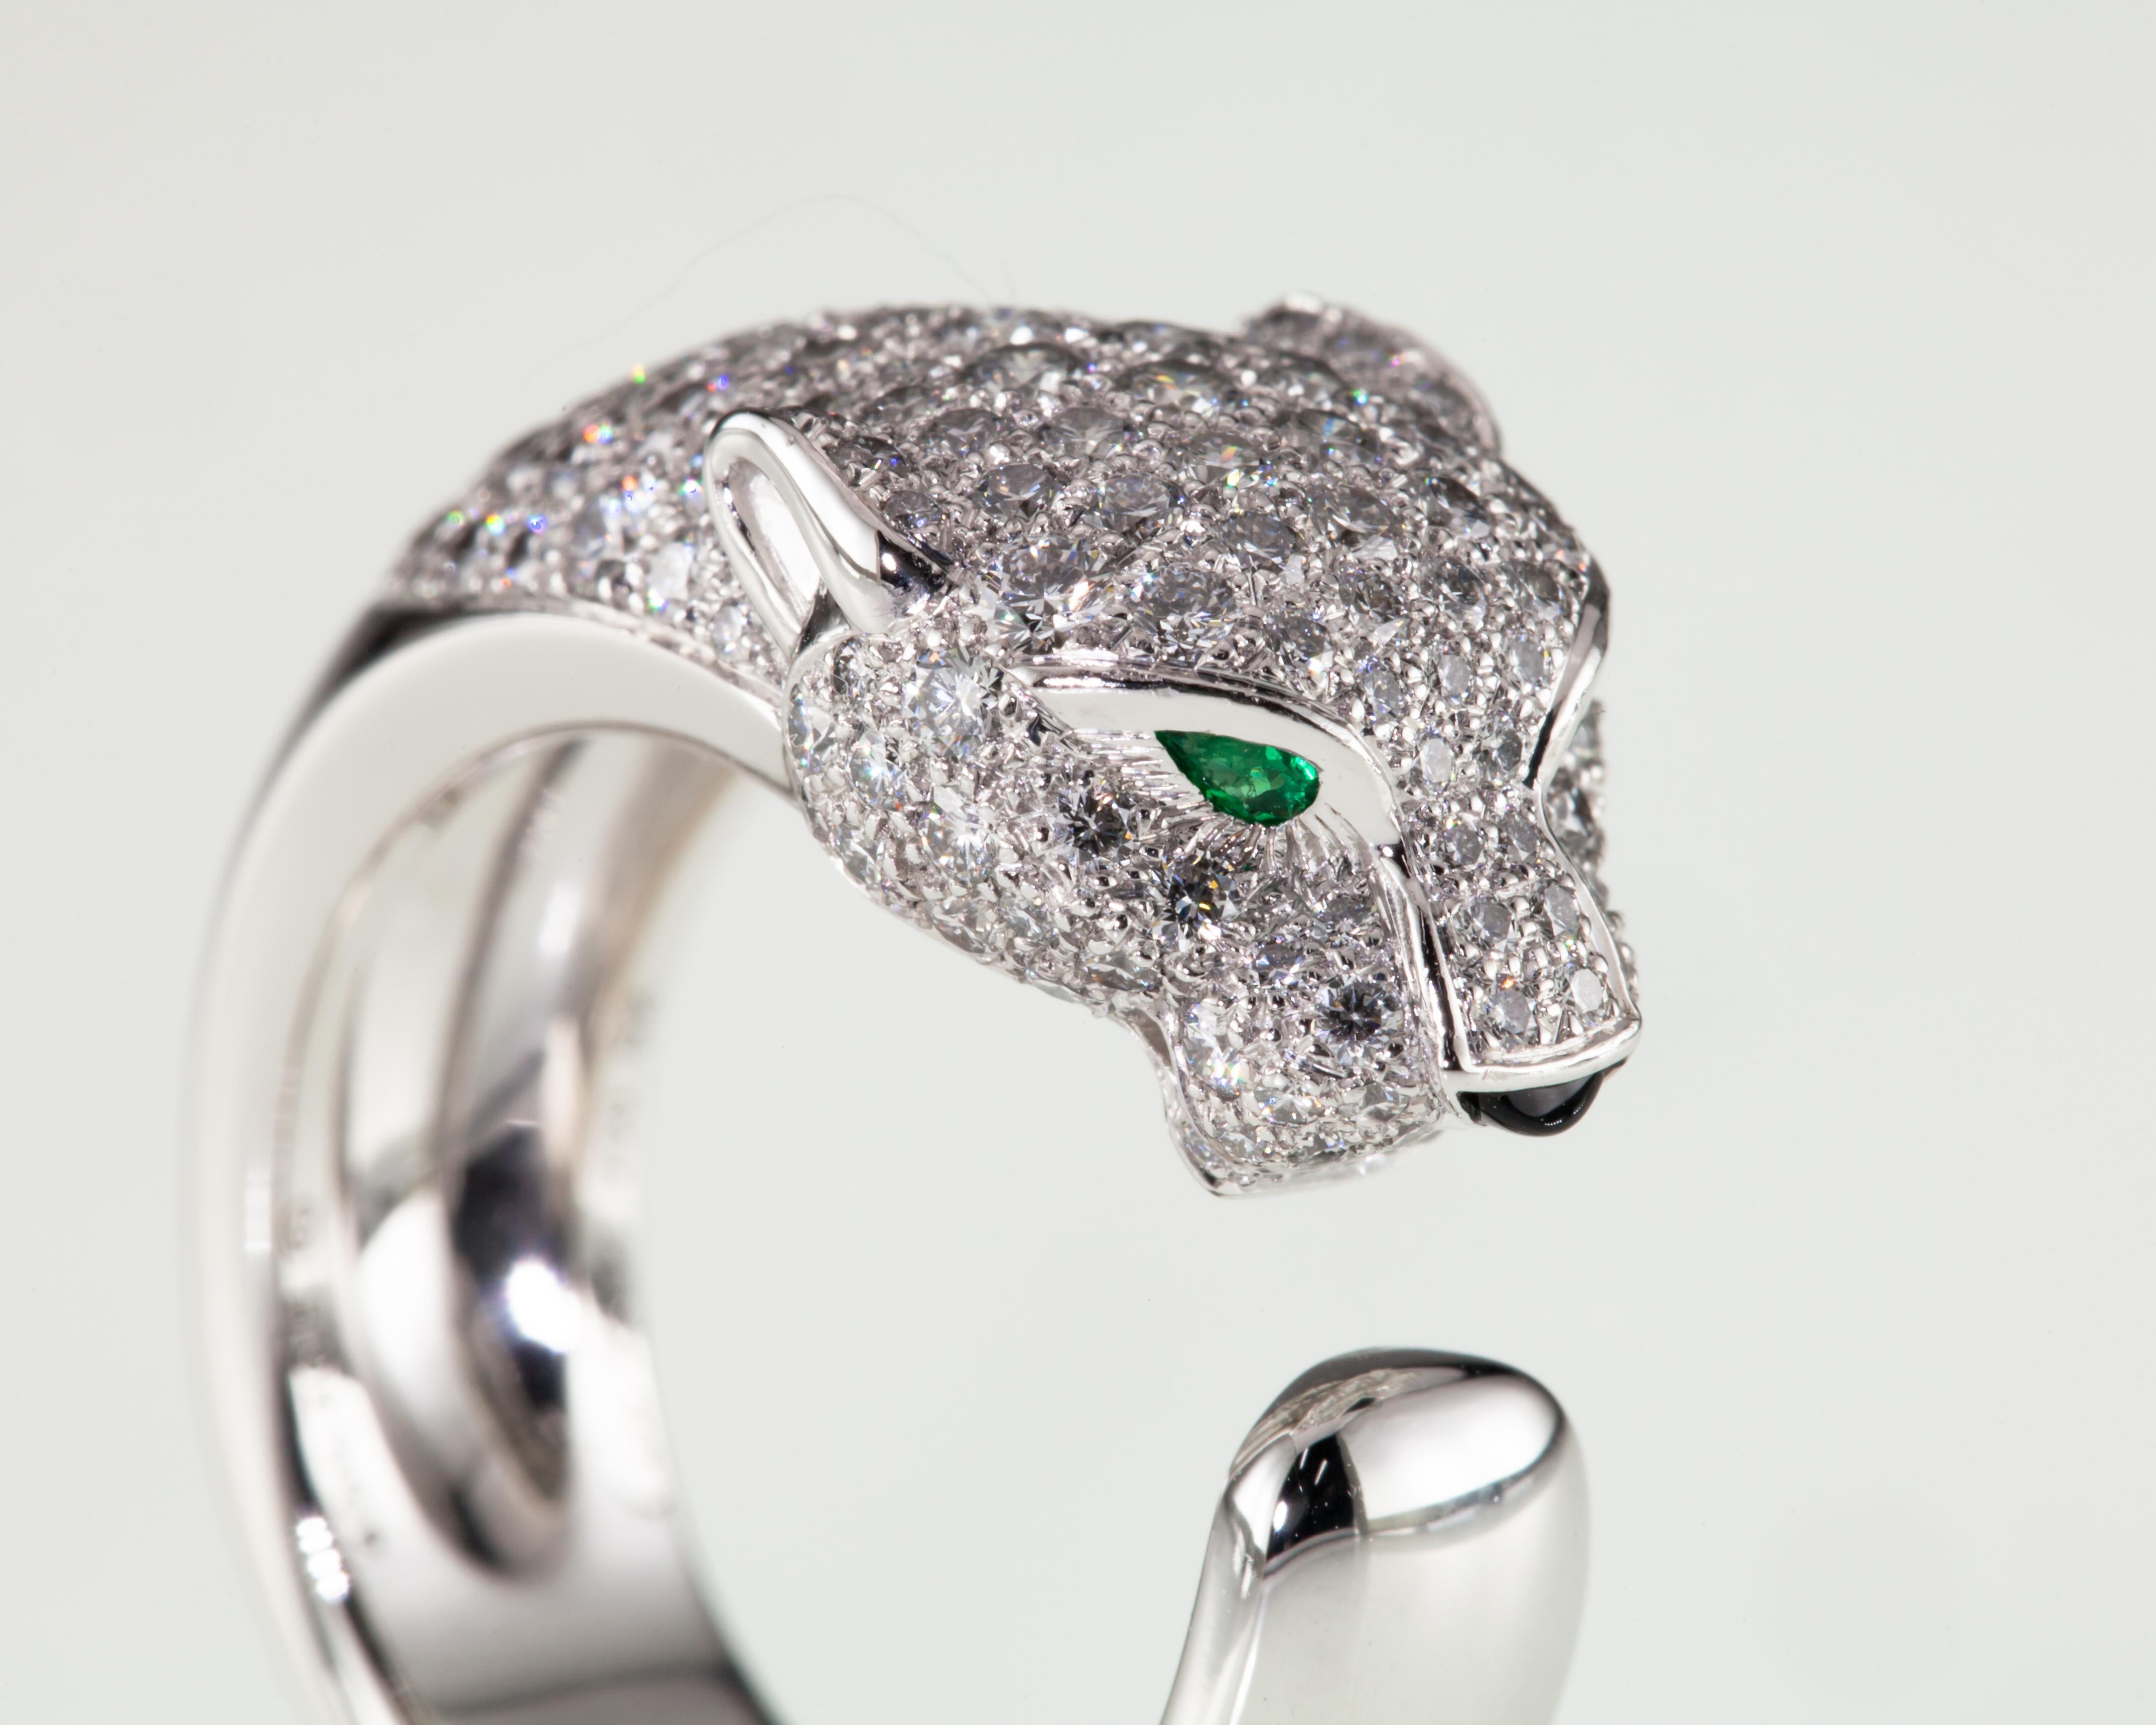 Gorgeous 18k White Gold Band Ring by Cartier
Features 1.15 Carats of Pave Collection Quality Diamonds
Emerald Eyes
Onyx Nose
Size 52 (US Size Appx 6.25)
Total Mass = 14.3 grams
Retails for $24,000
A Great Deal!